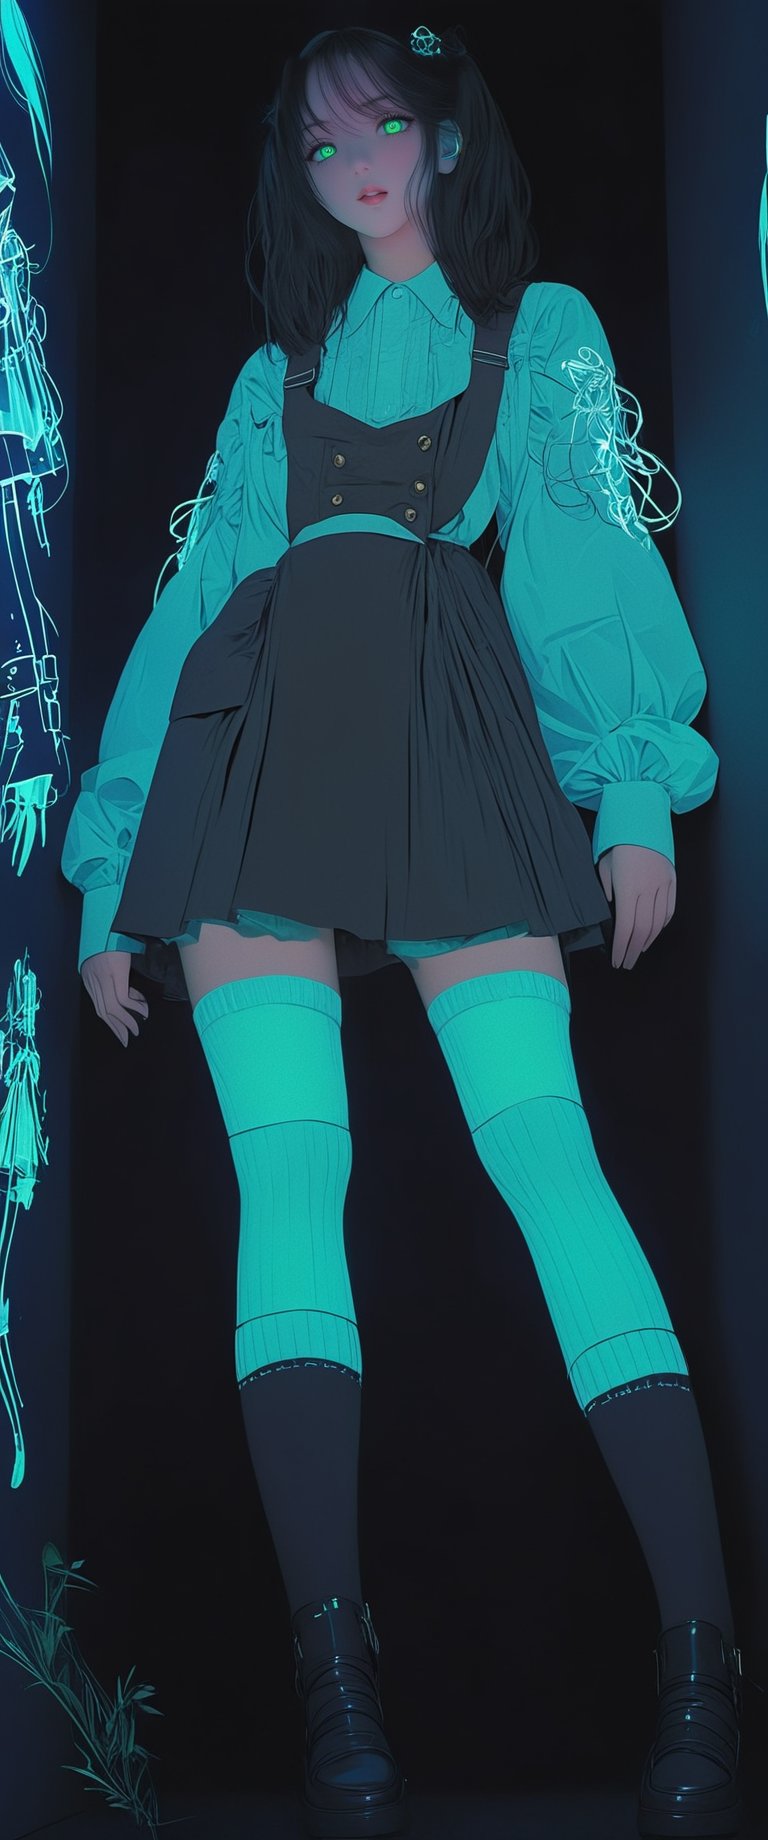 STICKER ON A WHITE BACKGROUND. green holographic silhouette, knee socks. I'm standing in a room with holograms. anime waifu. Stylish. Cute, hot, shiny. Highly detailed uhd anime wallpaper, cel digital animation

